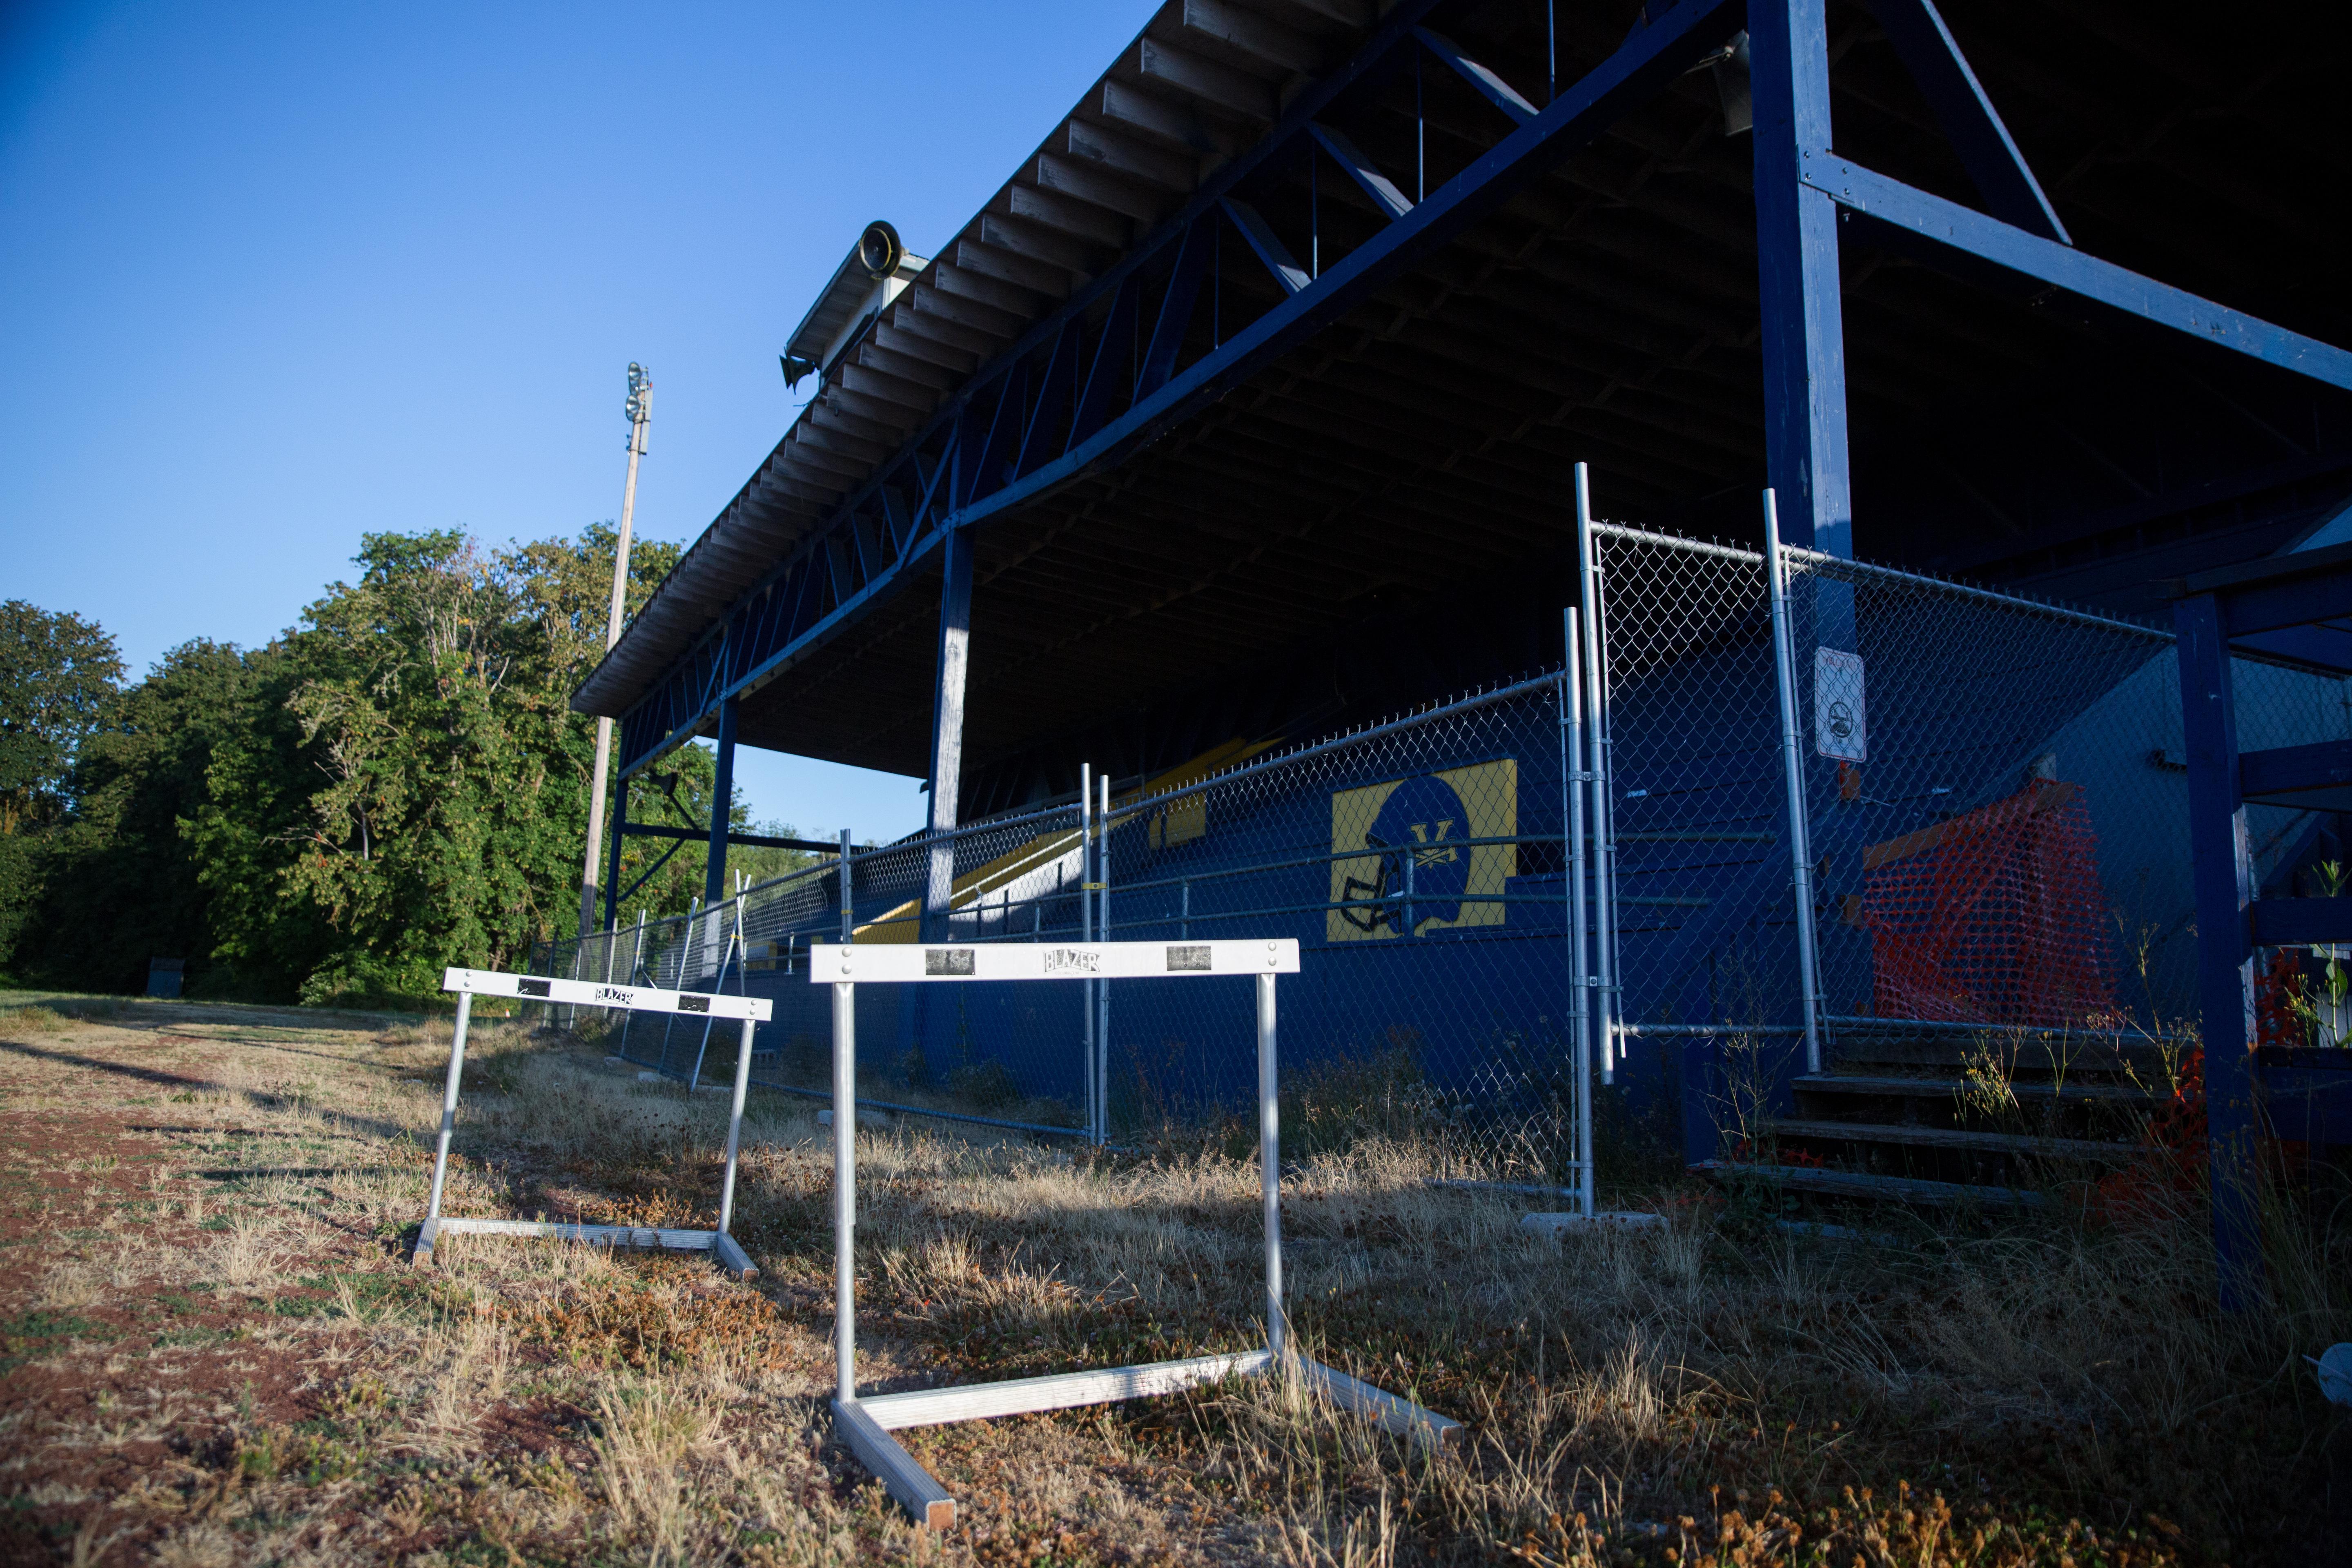 The Greenman Field Grandstand in Vernonia, Oregon, was completed in 1960.